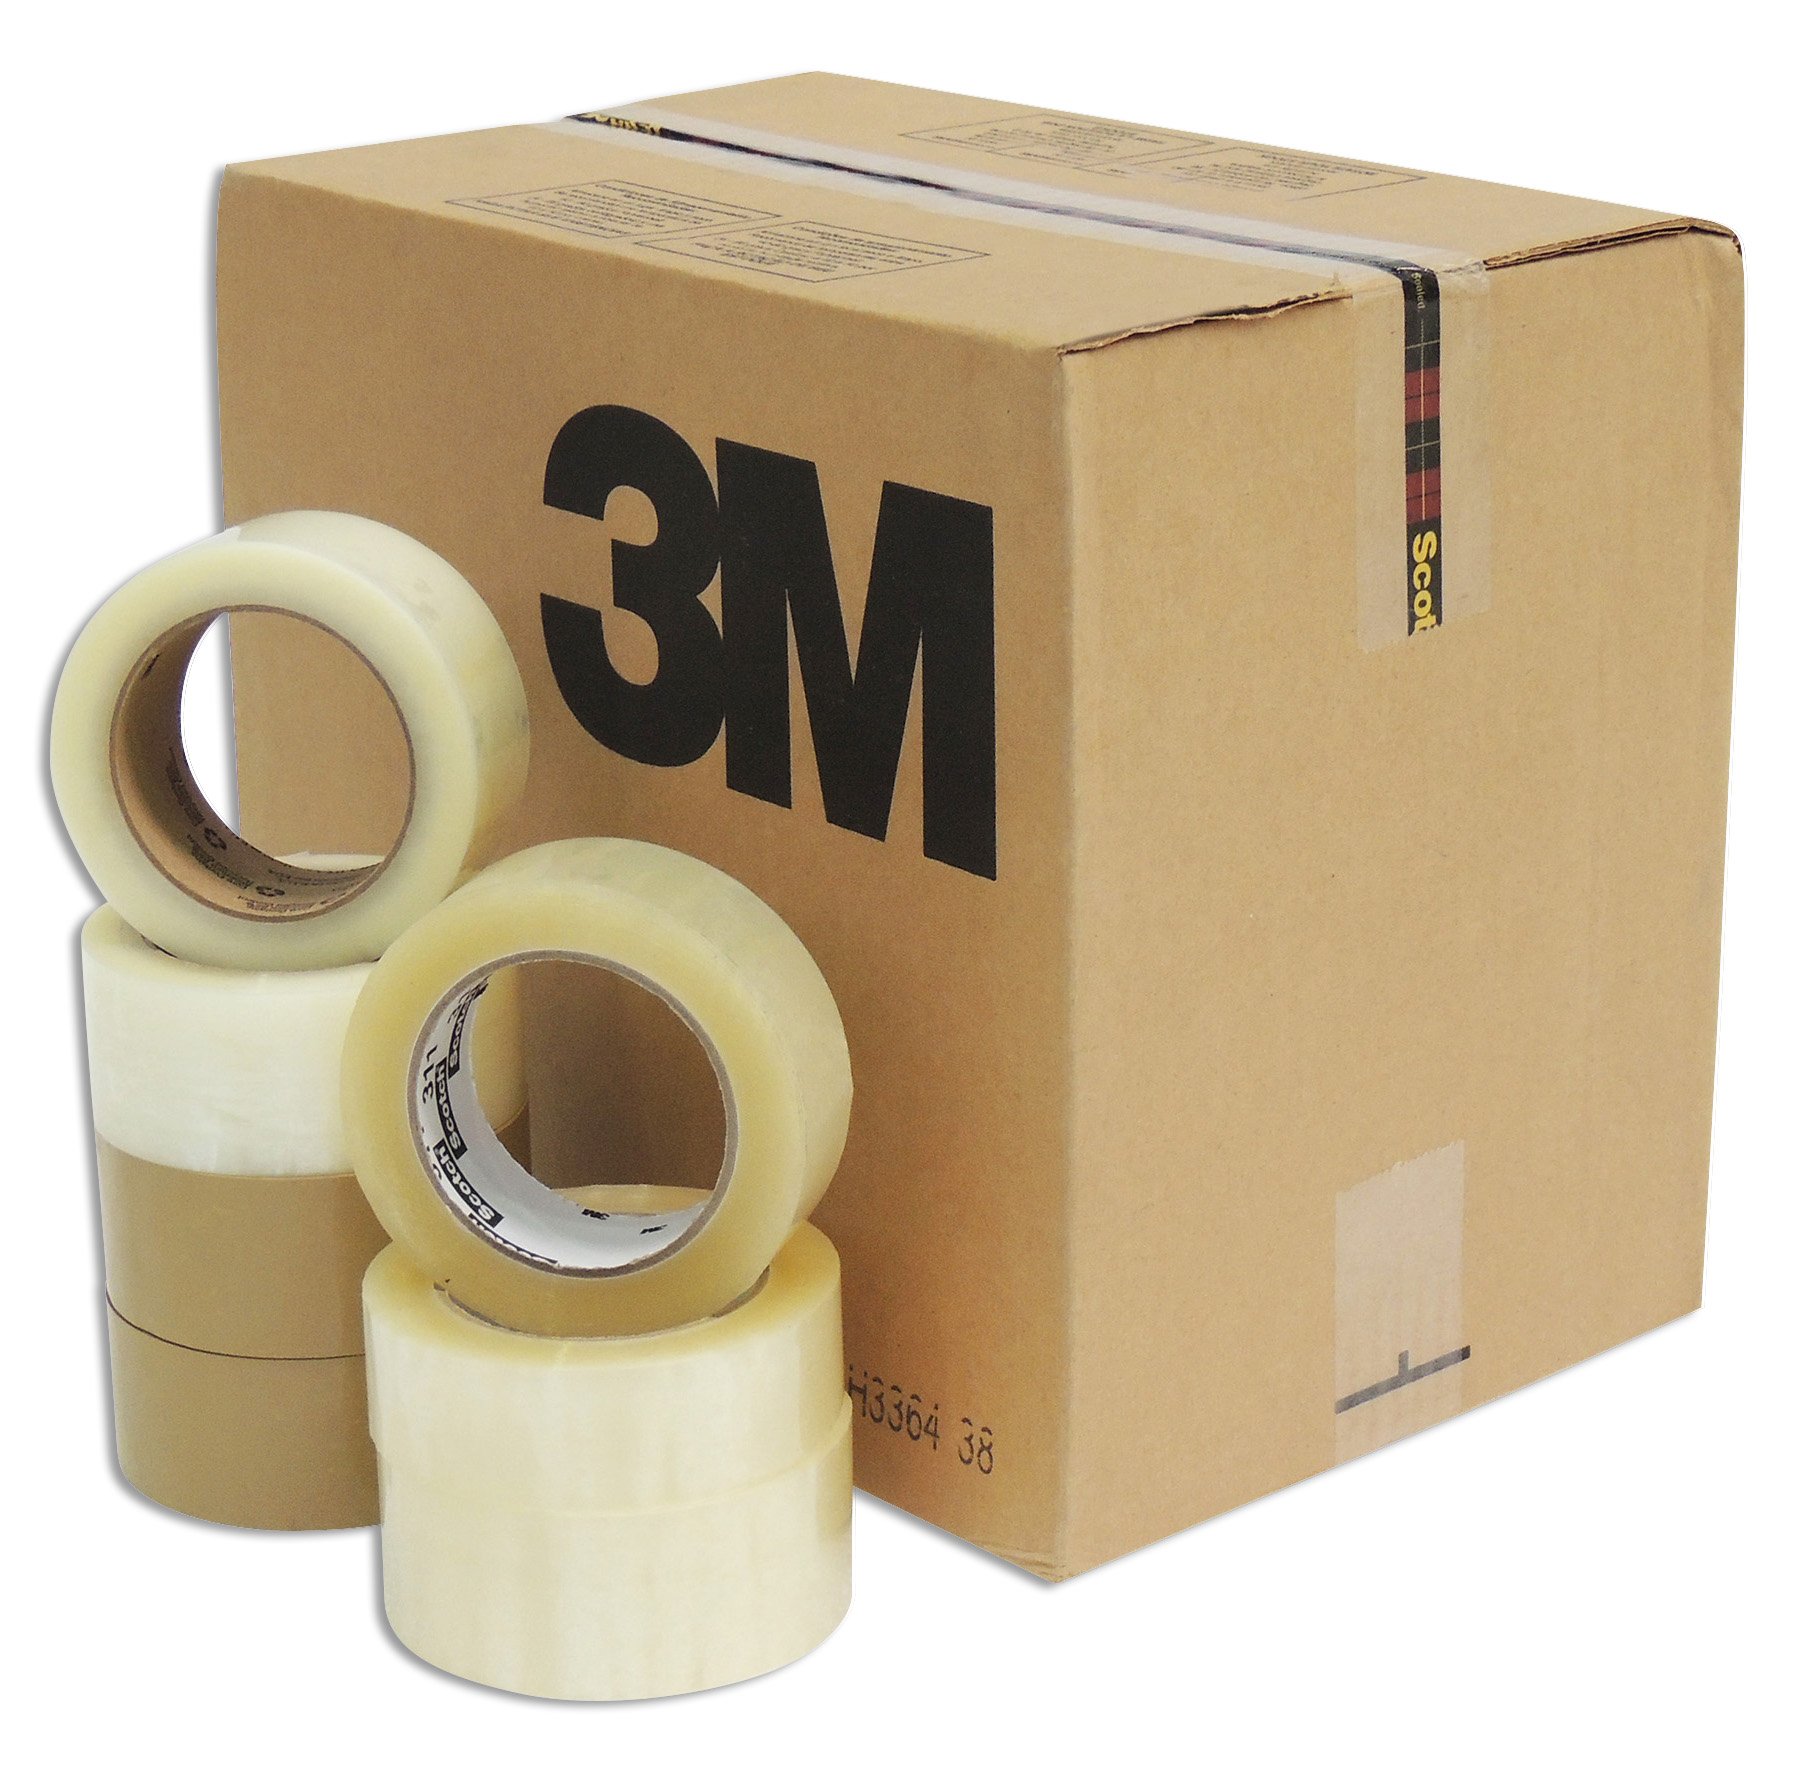 3M packaging tapes